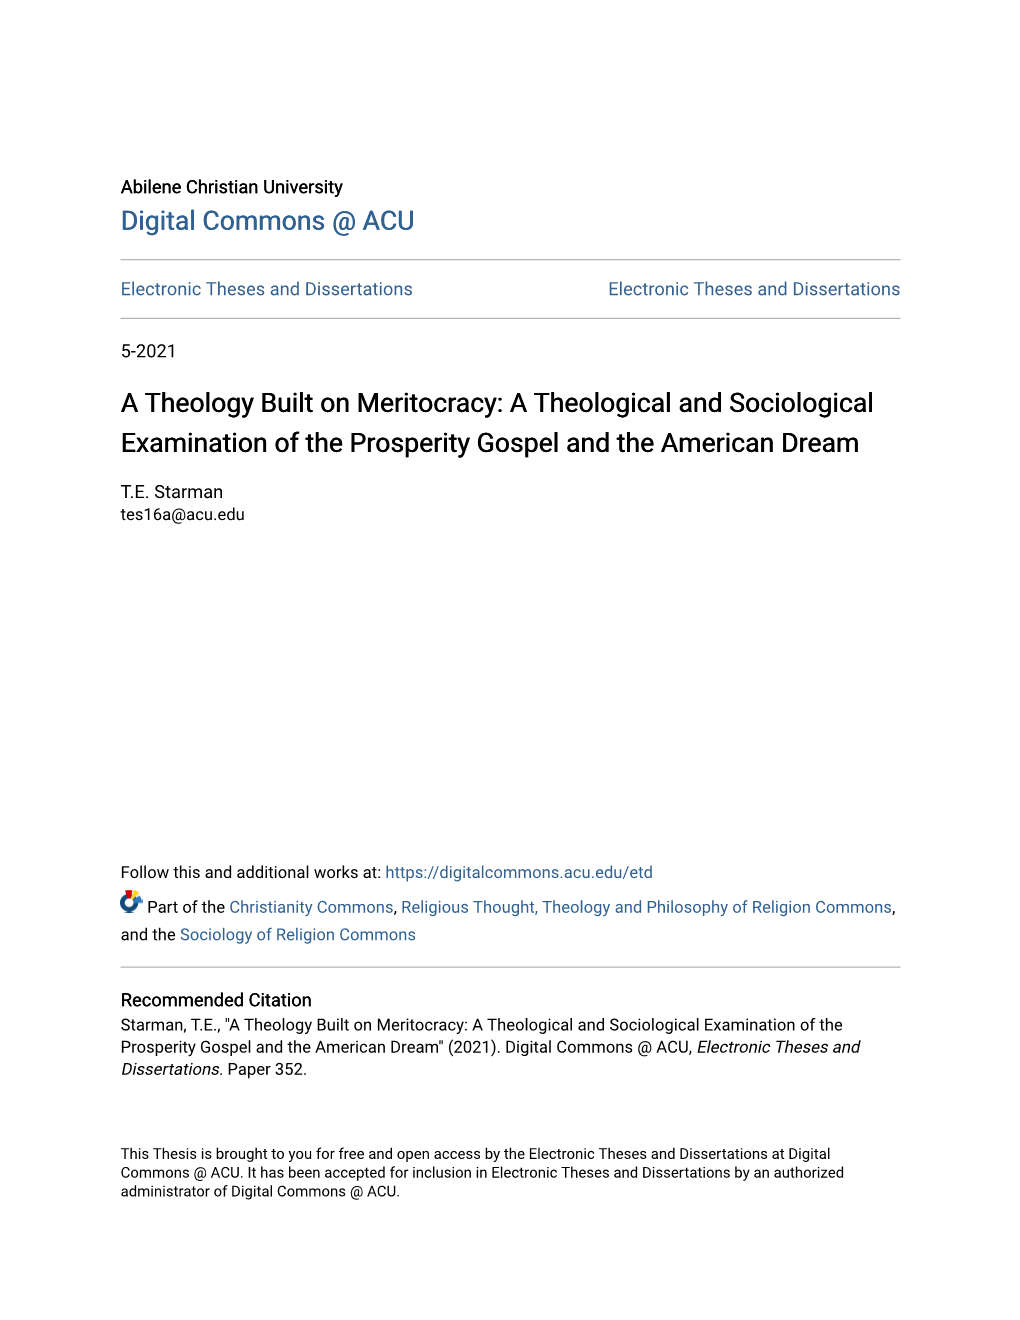 A Theology Built on Meritocracy: a Theological and Sociological Examination of the Prosperity Gospel and the American Dream